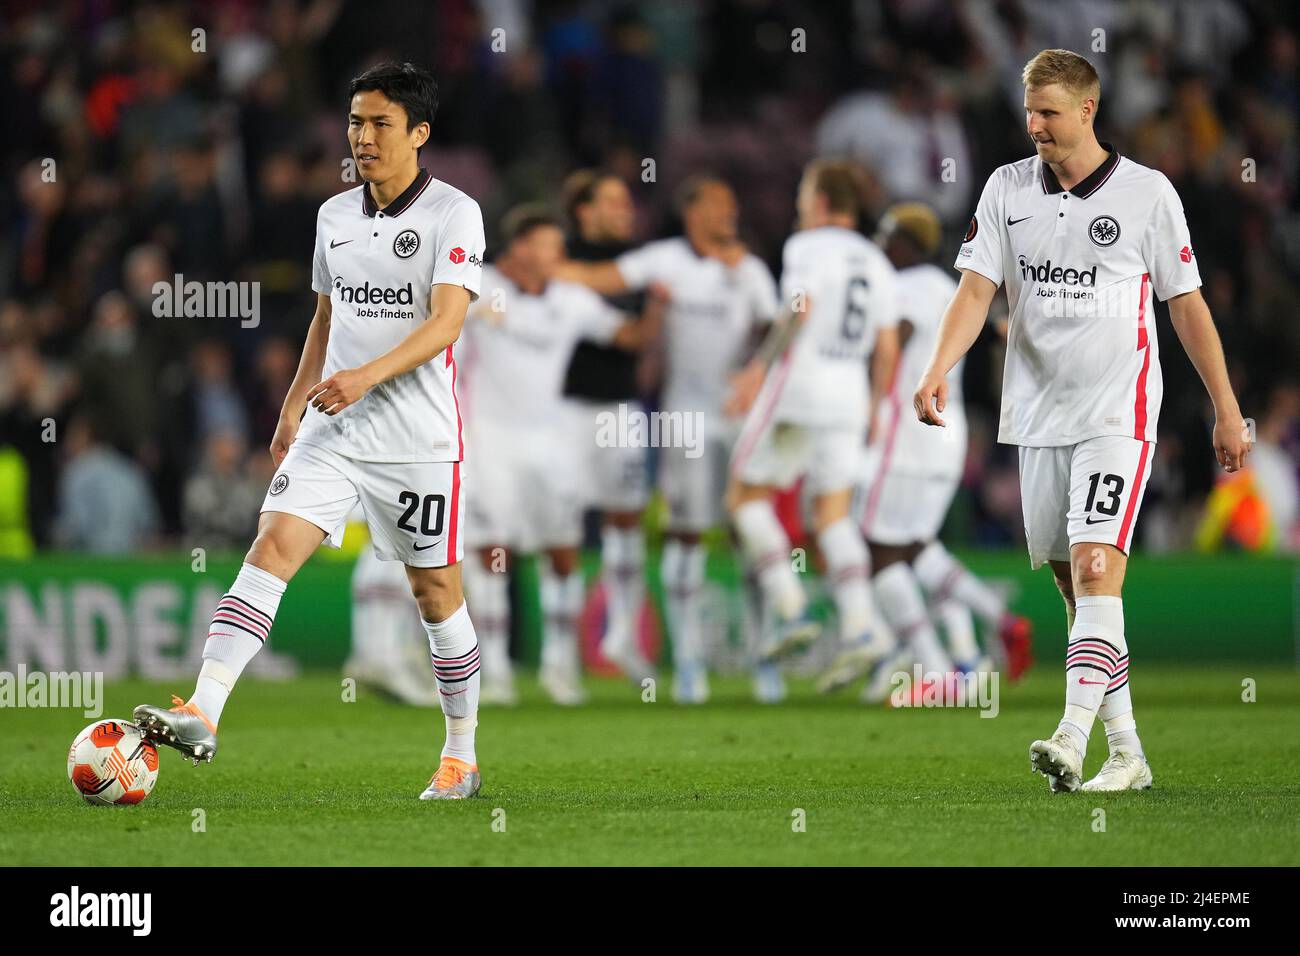 Makoto Hasebe and Martin Hinteregger of Eintracht Frankfurt at full time during the UEFA Europa League match, Quarter Final, Second Leg, between FC Barcelona and Eintracht Frankfurt played at Camp Nou Stadium on April 14, 2022 in Barcelona, Spain. (Photo by Colas Buera / PRESSINPHOTO) Stock Photo